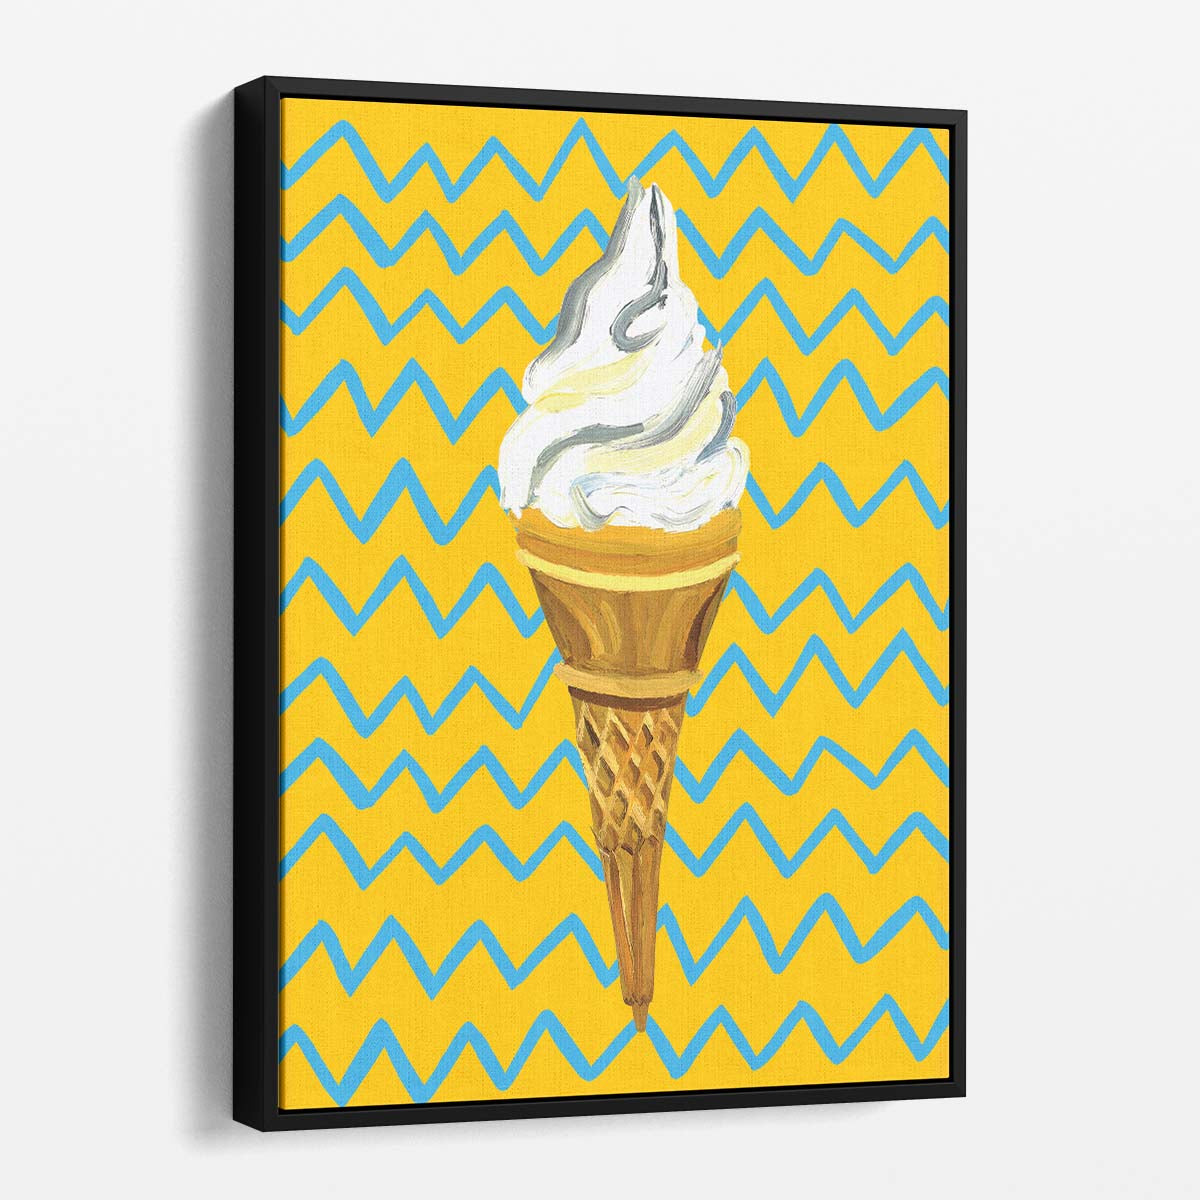 Abstract Geometric Yellow Ice Cream Illustration Kitchen Wall Art by Luxuriance Designs, made in USA